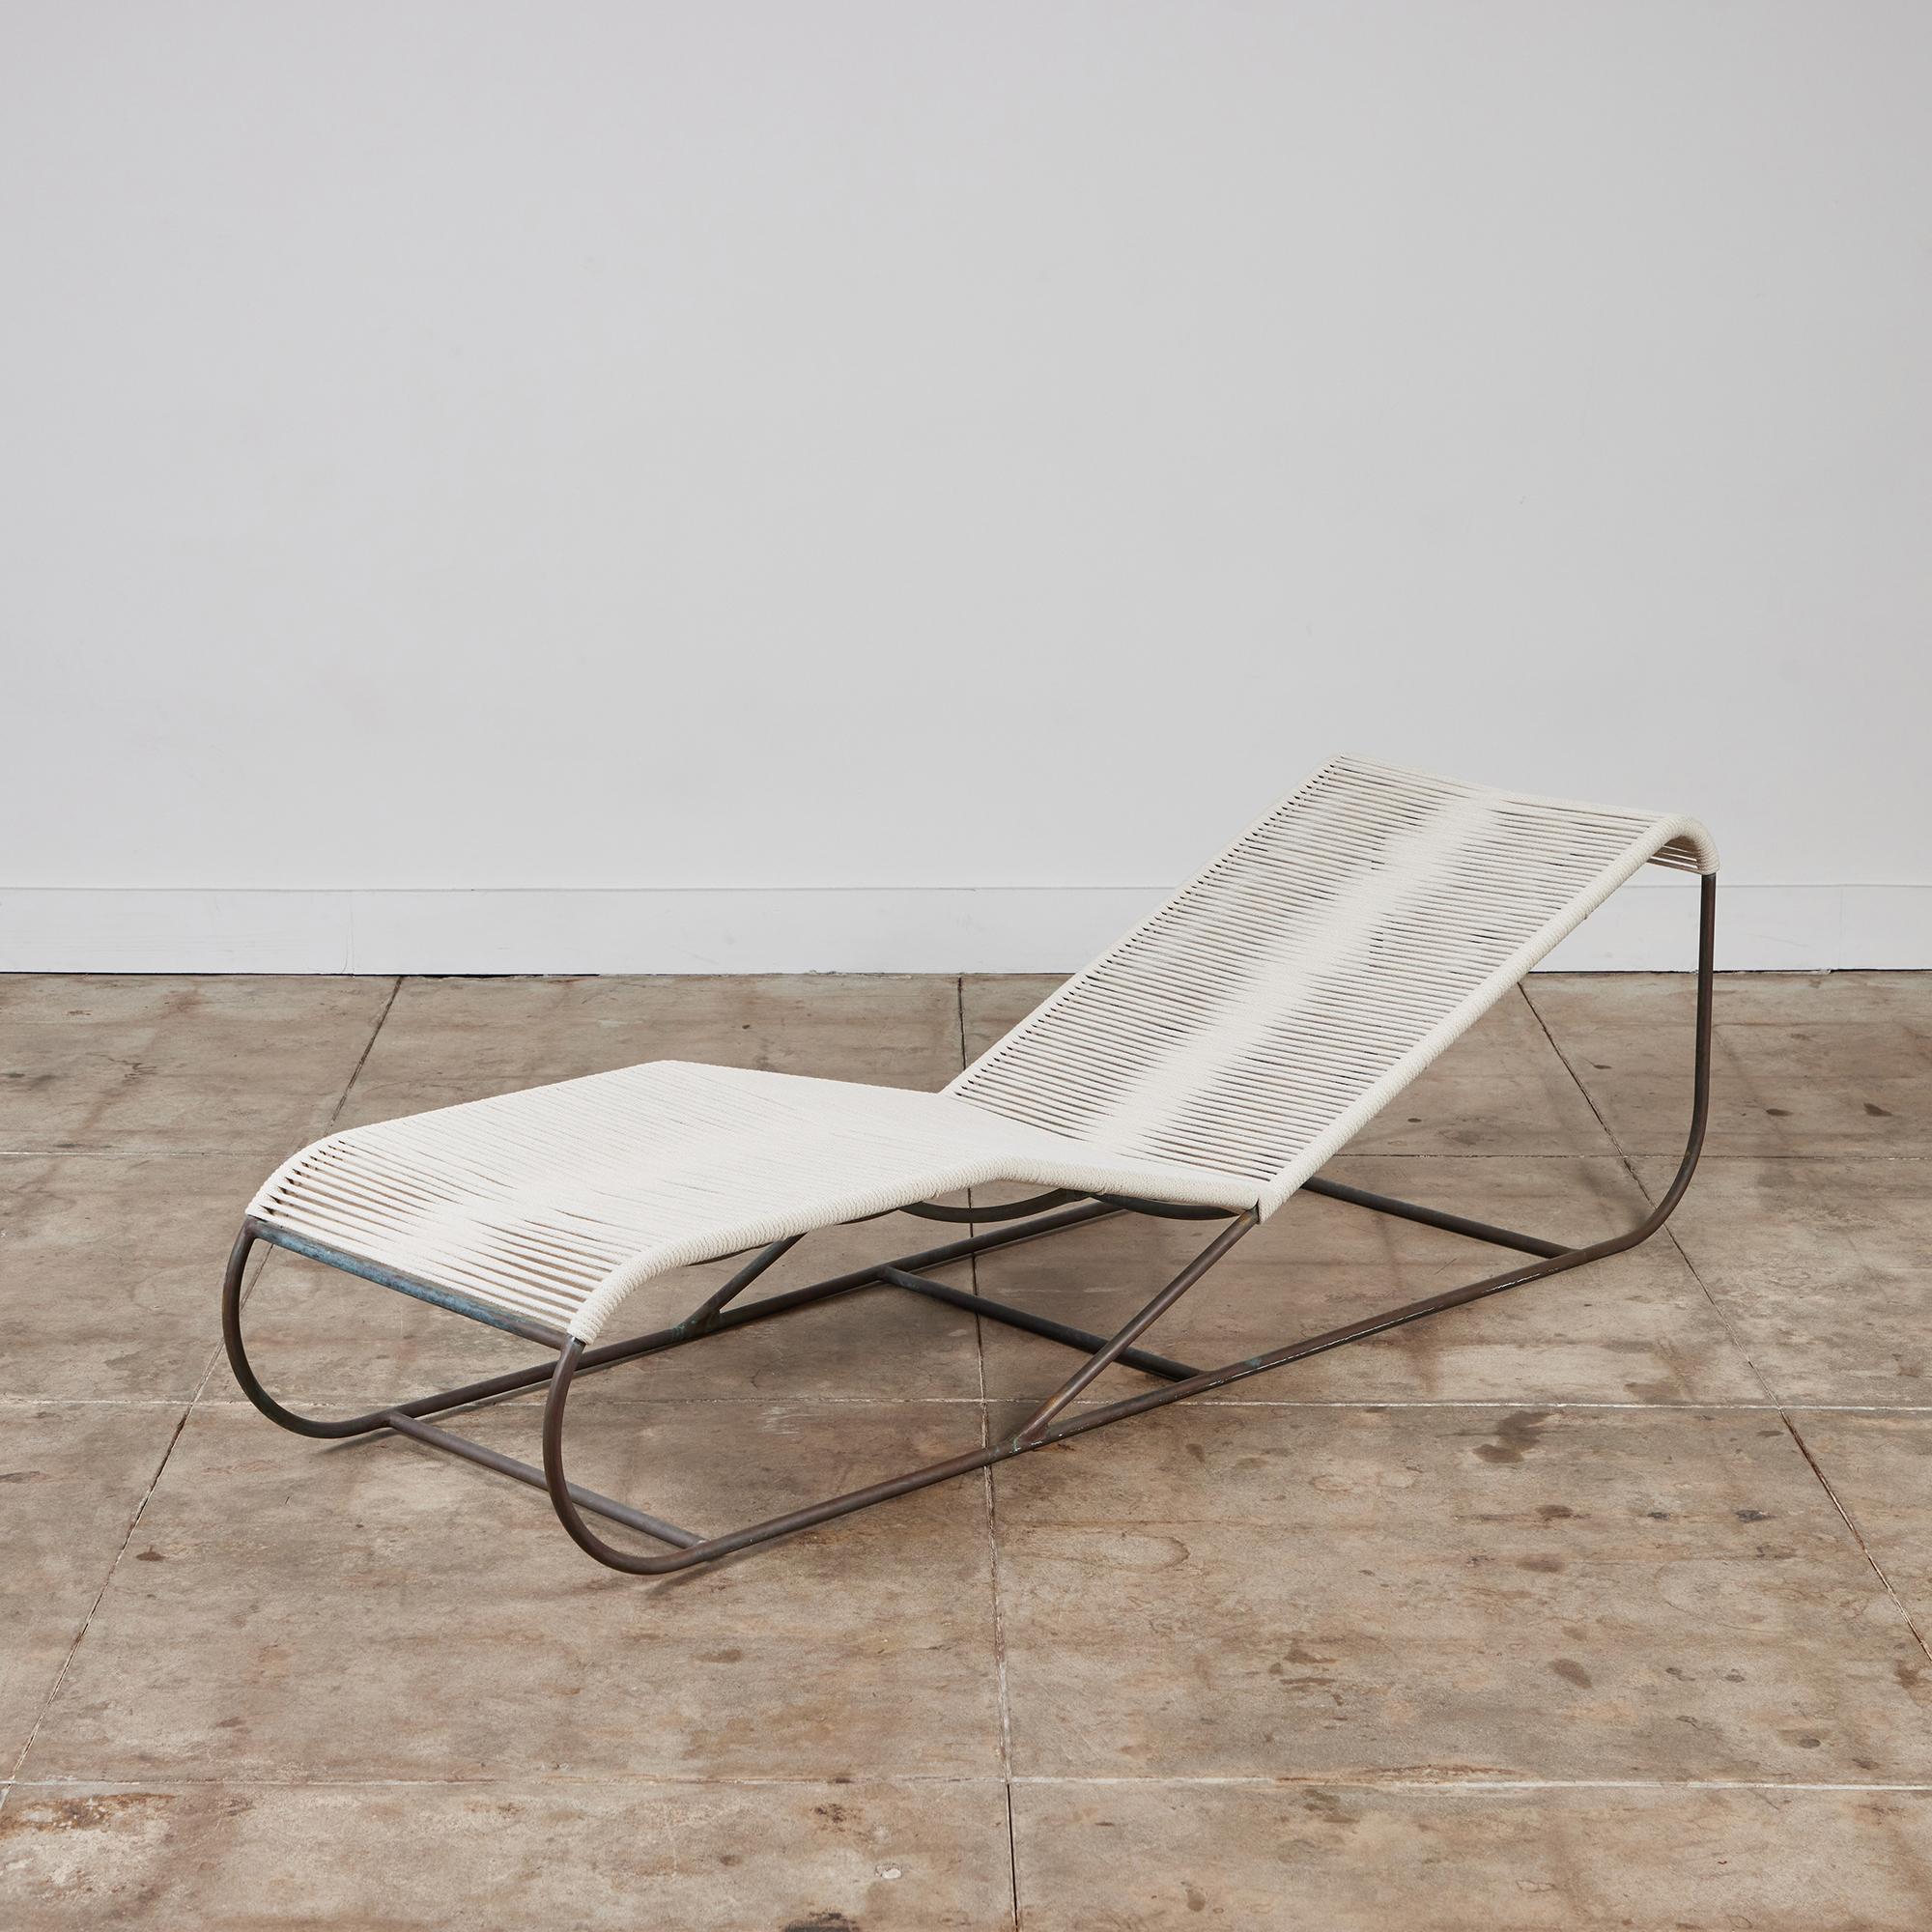 Chaise lounge chair by Kipp Stewart for Terra of California, USA, c.1970s. The chaise features a patinated bronze tube frame with new cotton rope that has been woven to the same pattern and specifications as was originally done on the chaise when